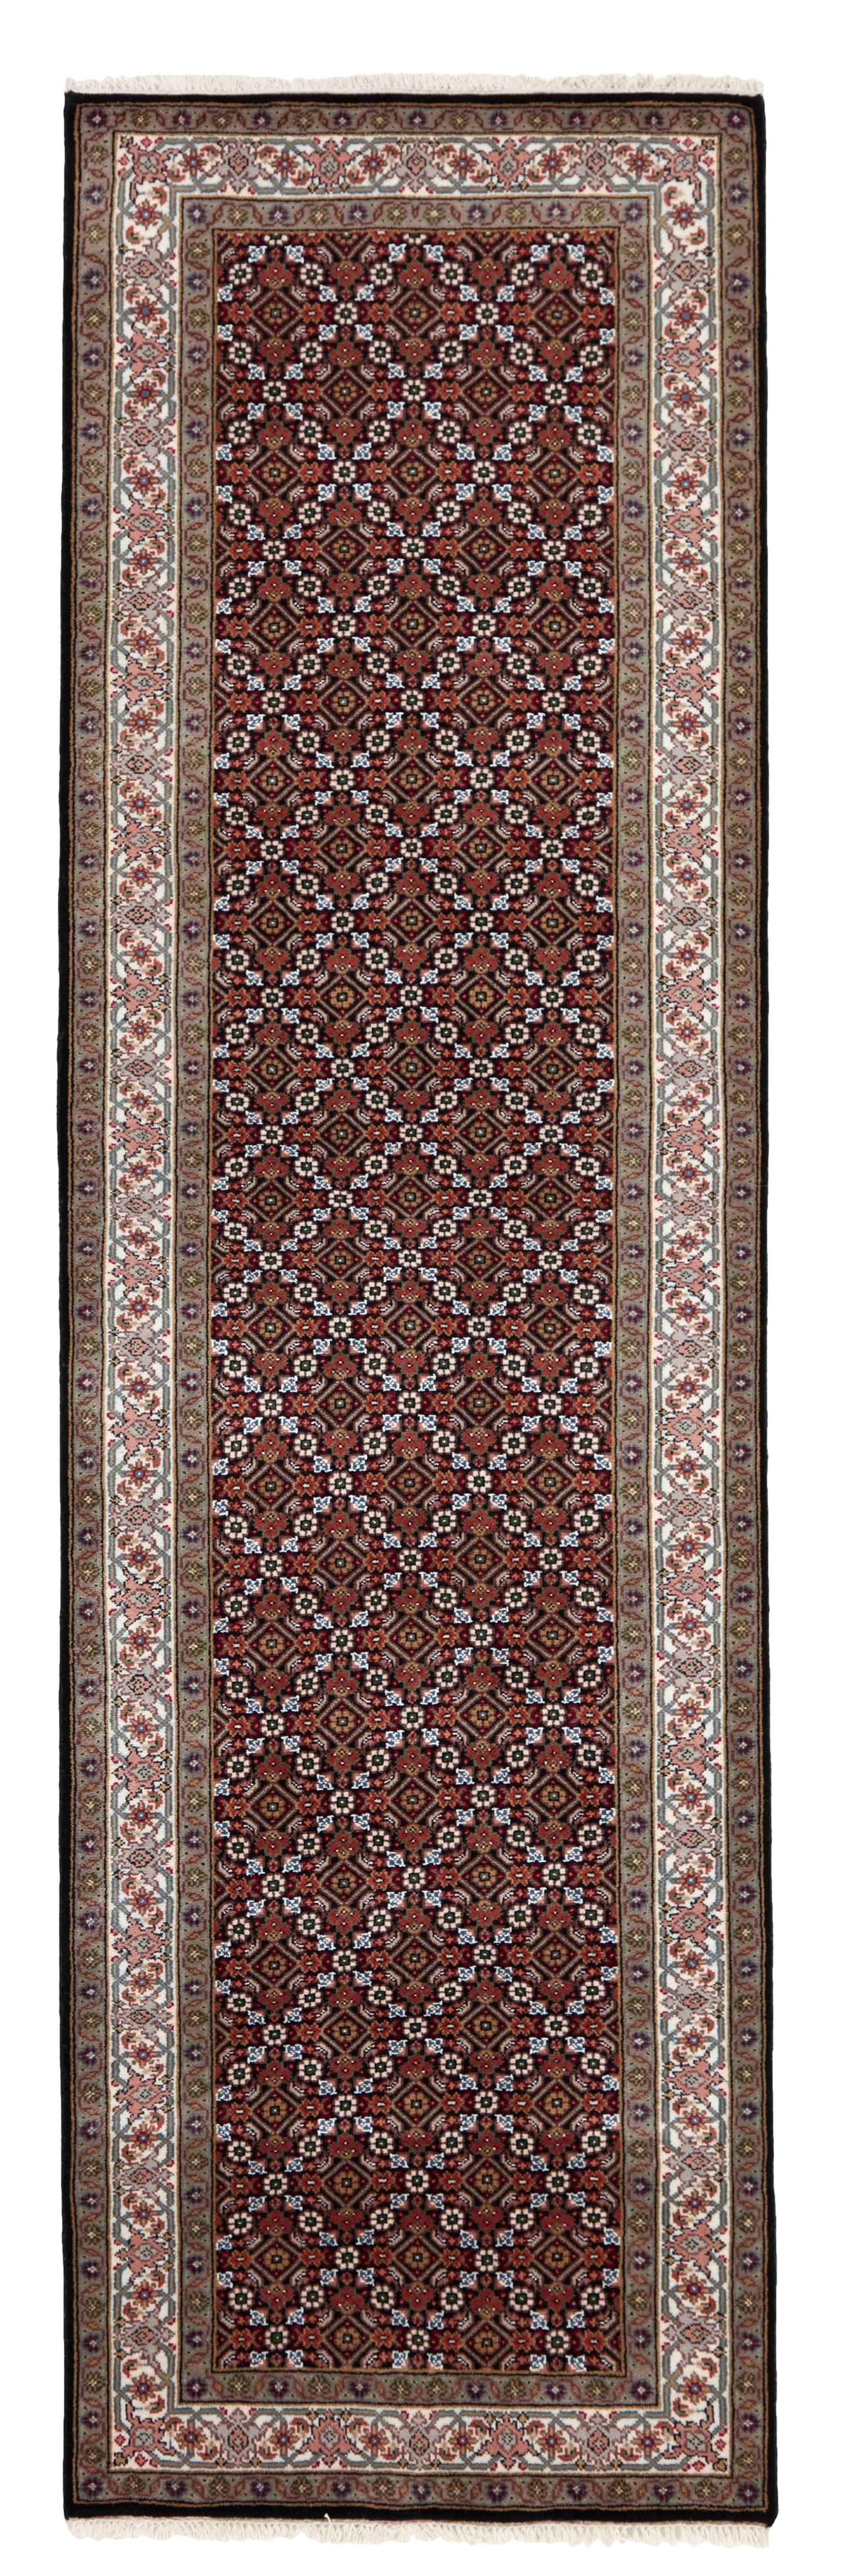 Authentic Oriental runner with traditional geometric and floral design in red, beige and black